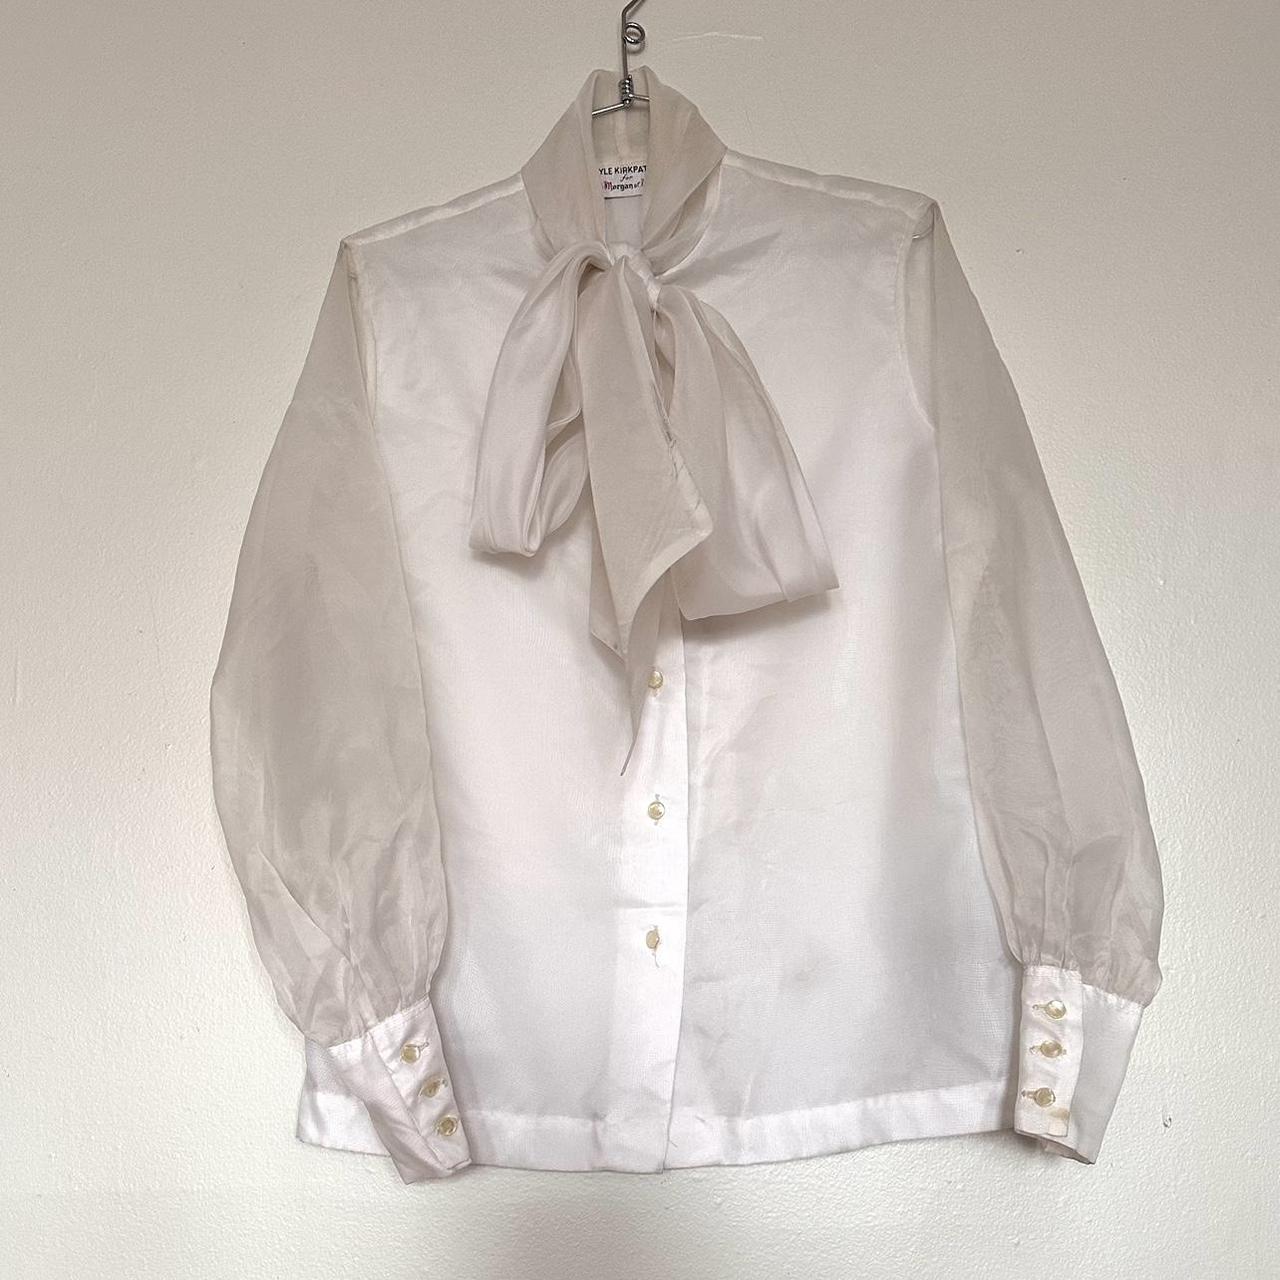 Vintage blouse with tie neckline. Opaque fabric on... - Depop